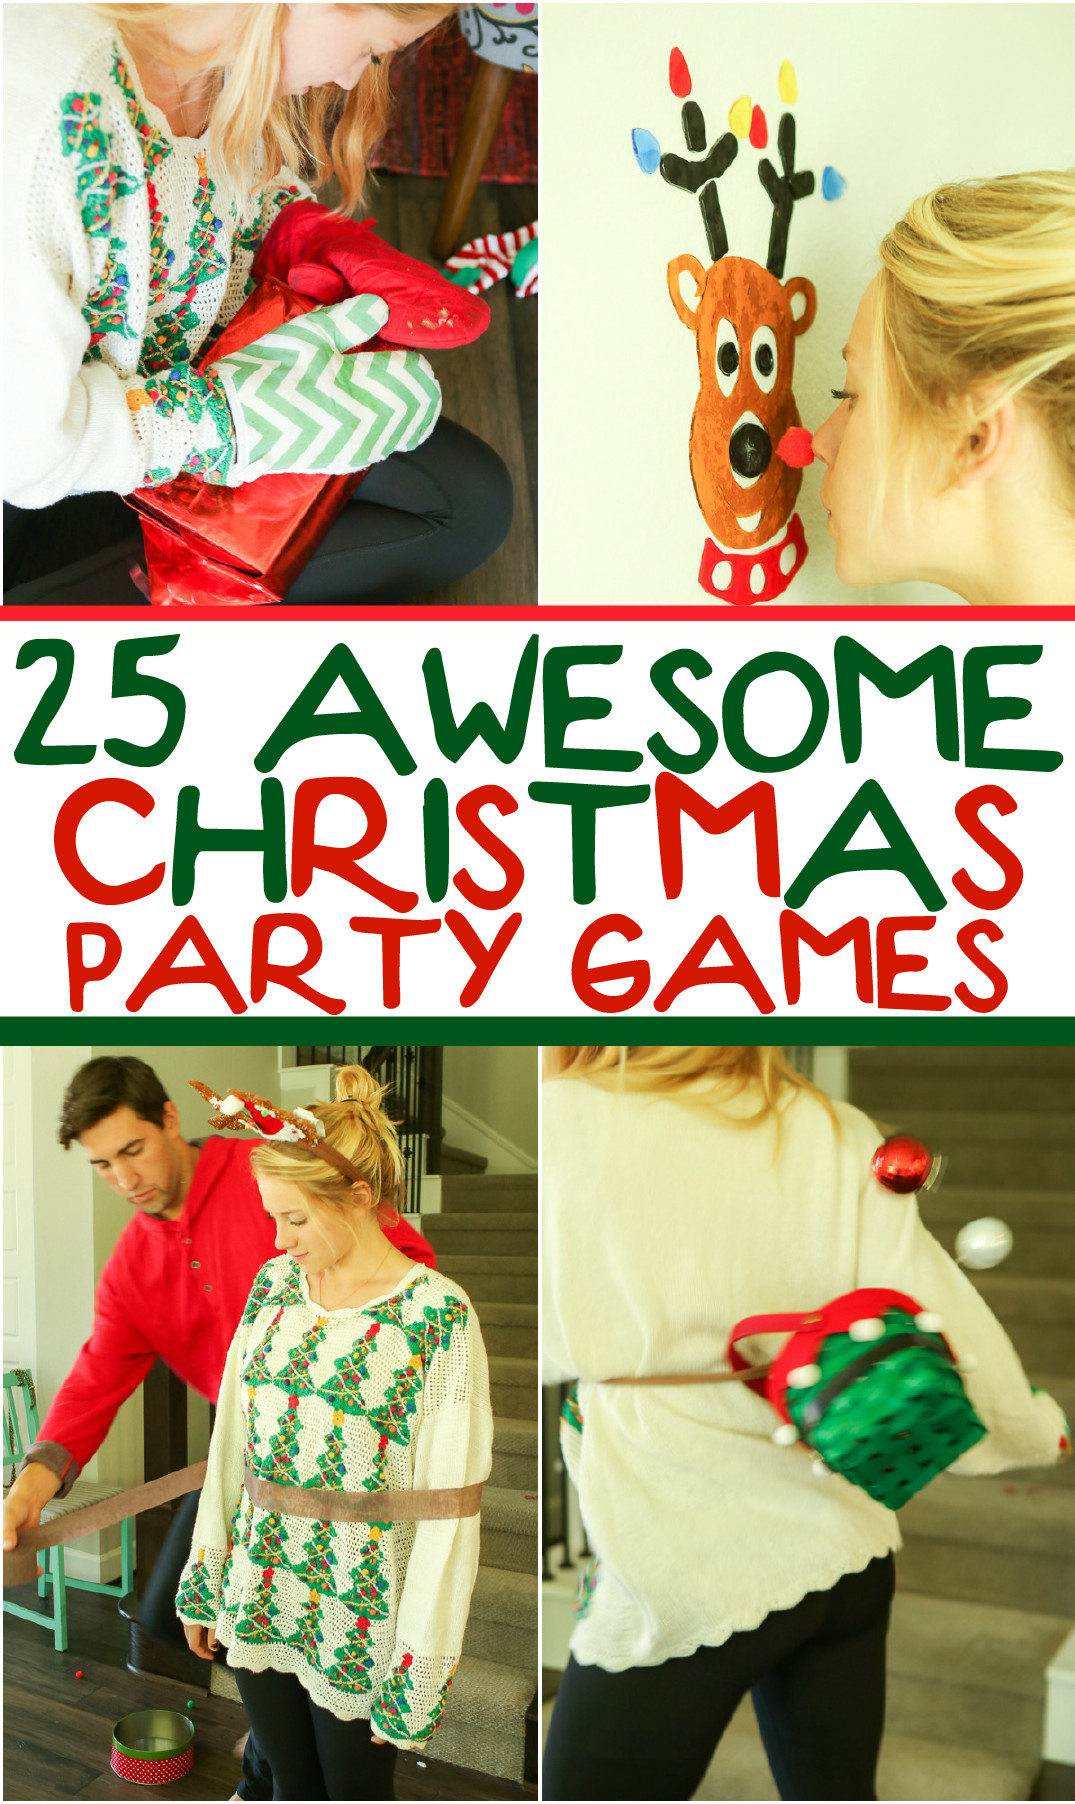 Christmas Party Entertainment Ideas For Adults
 25 funny Christmas party games that are great for adults